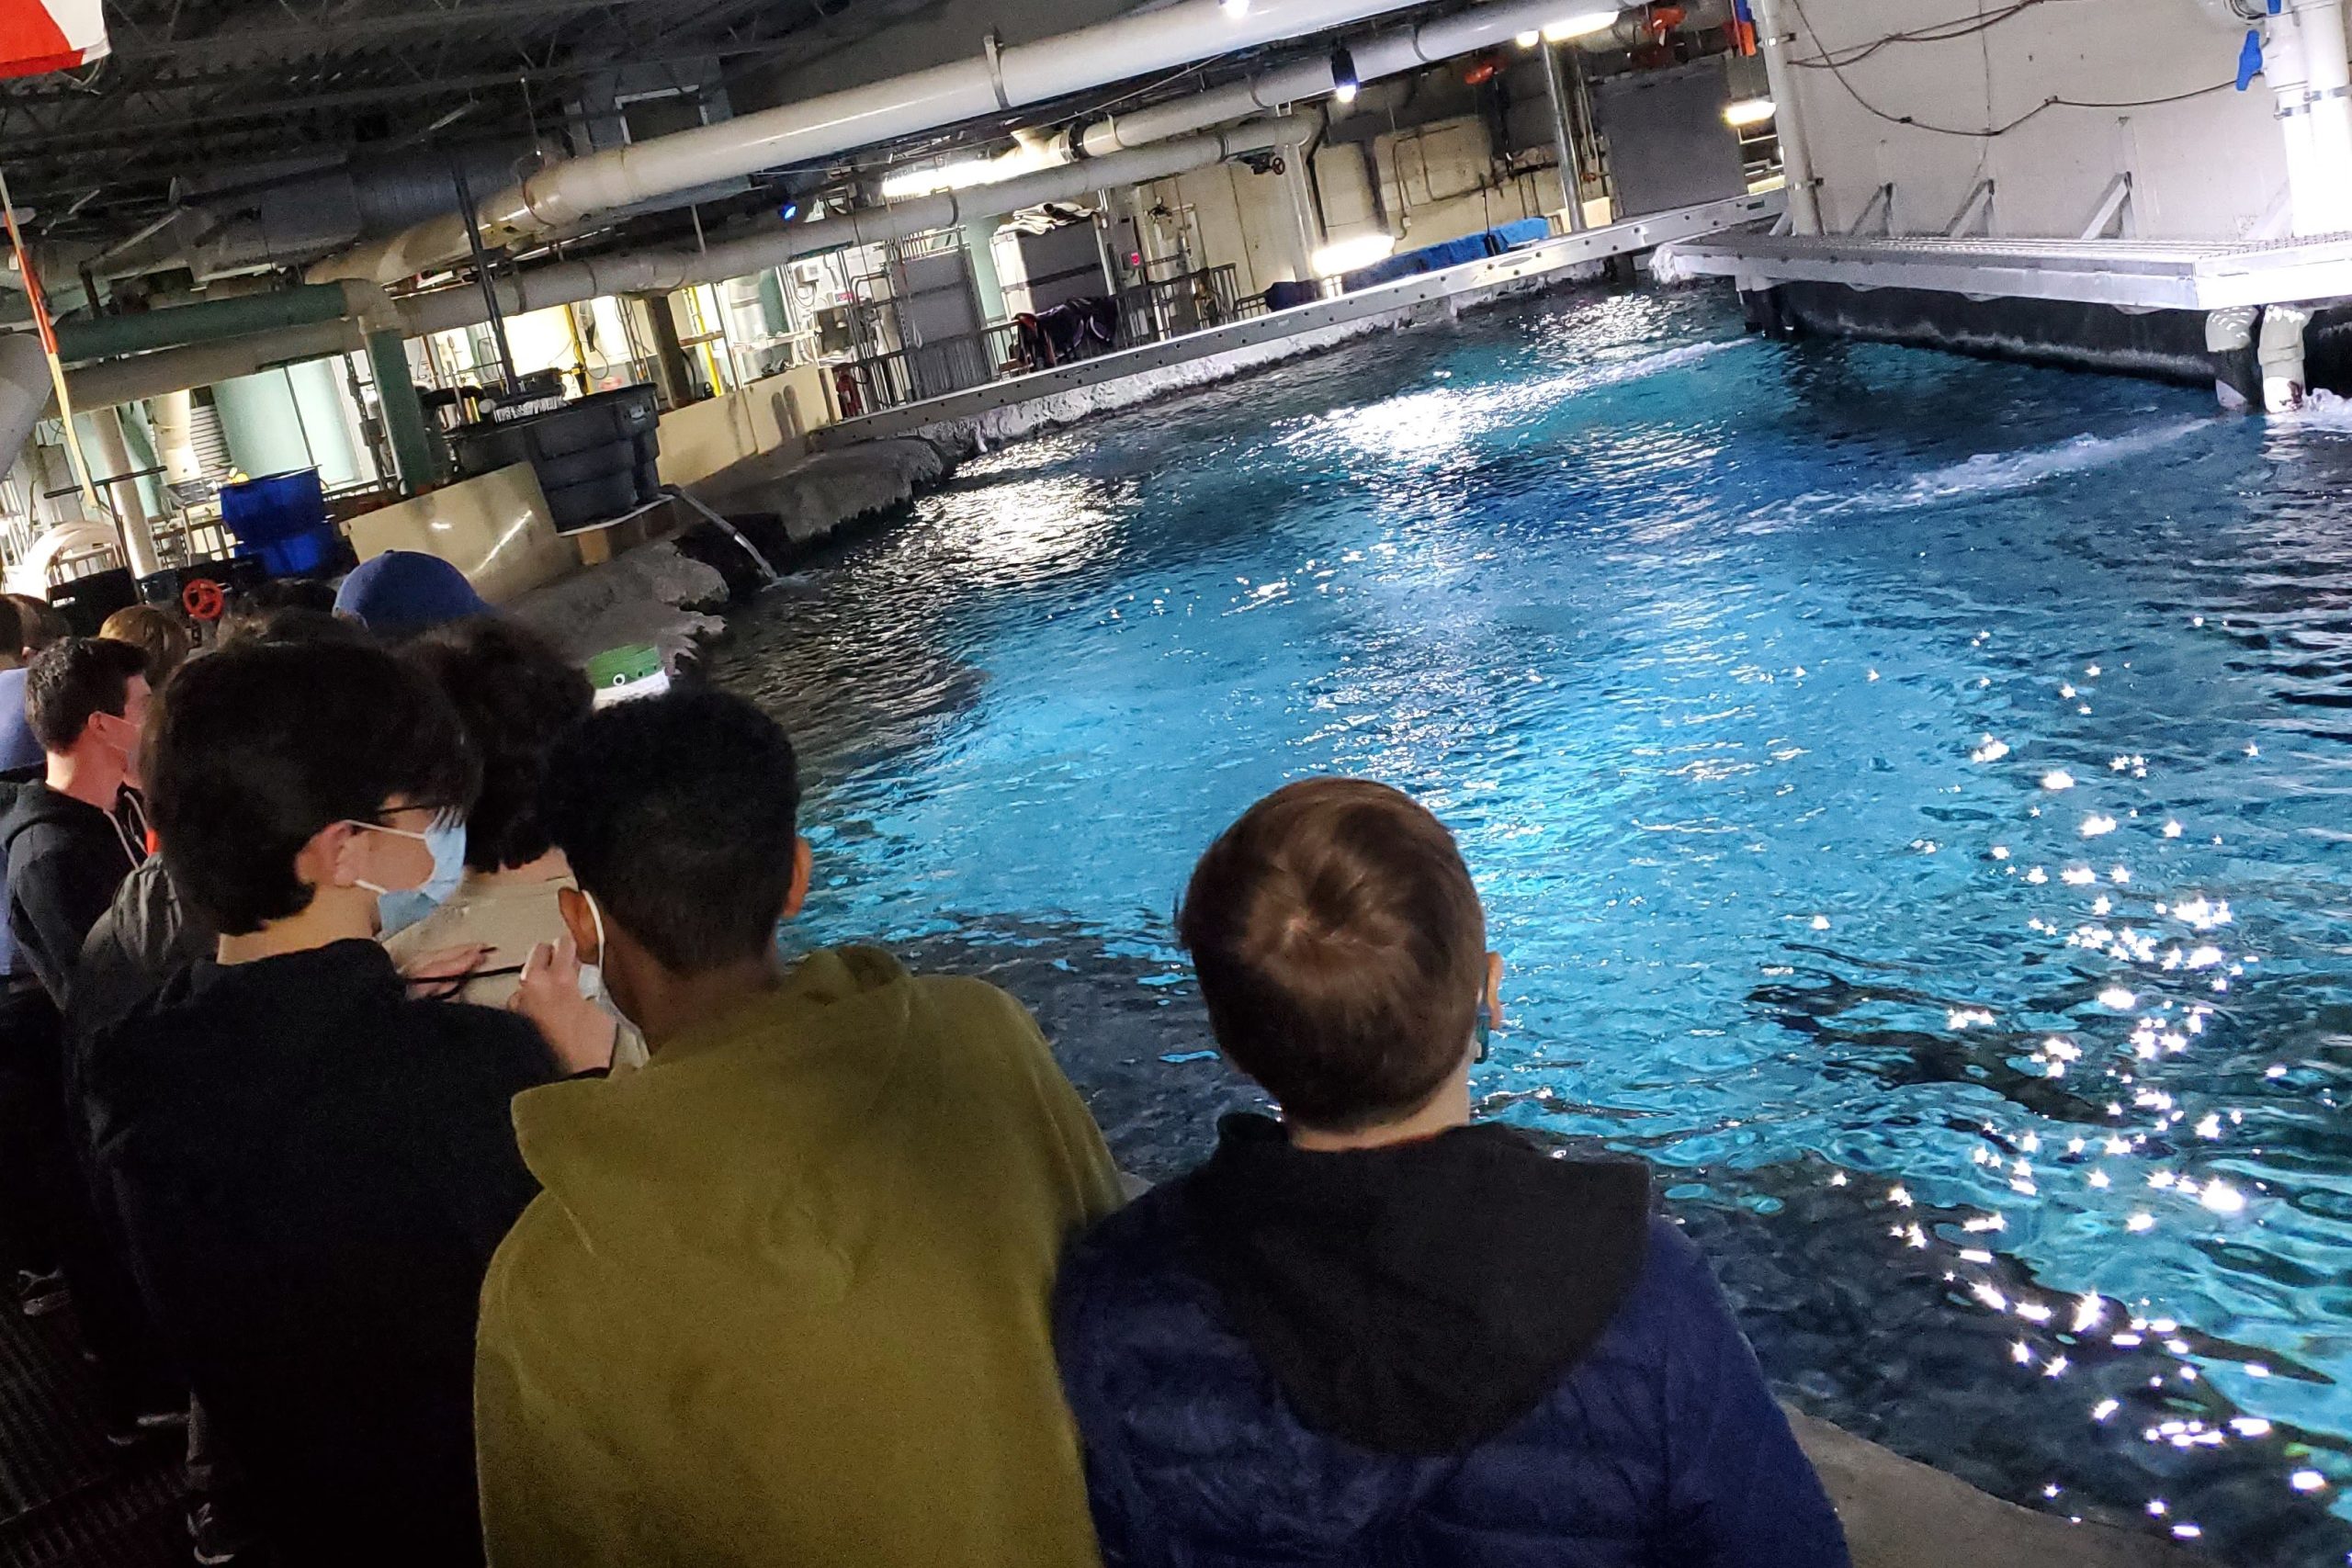 group of students standing behind the scenes over looking a alrge pool of water